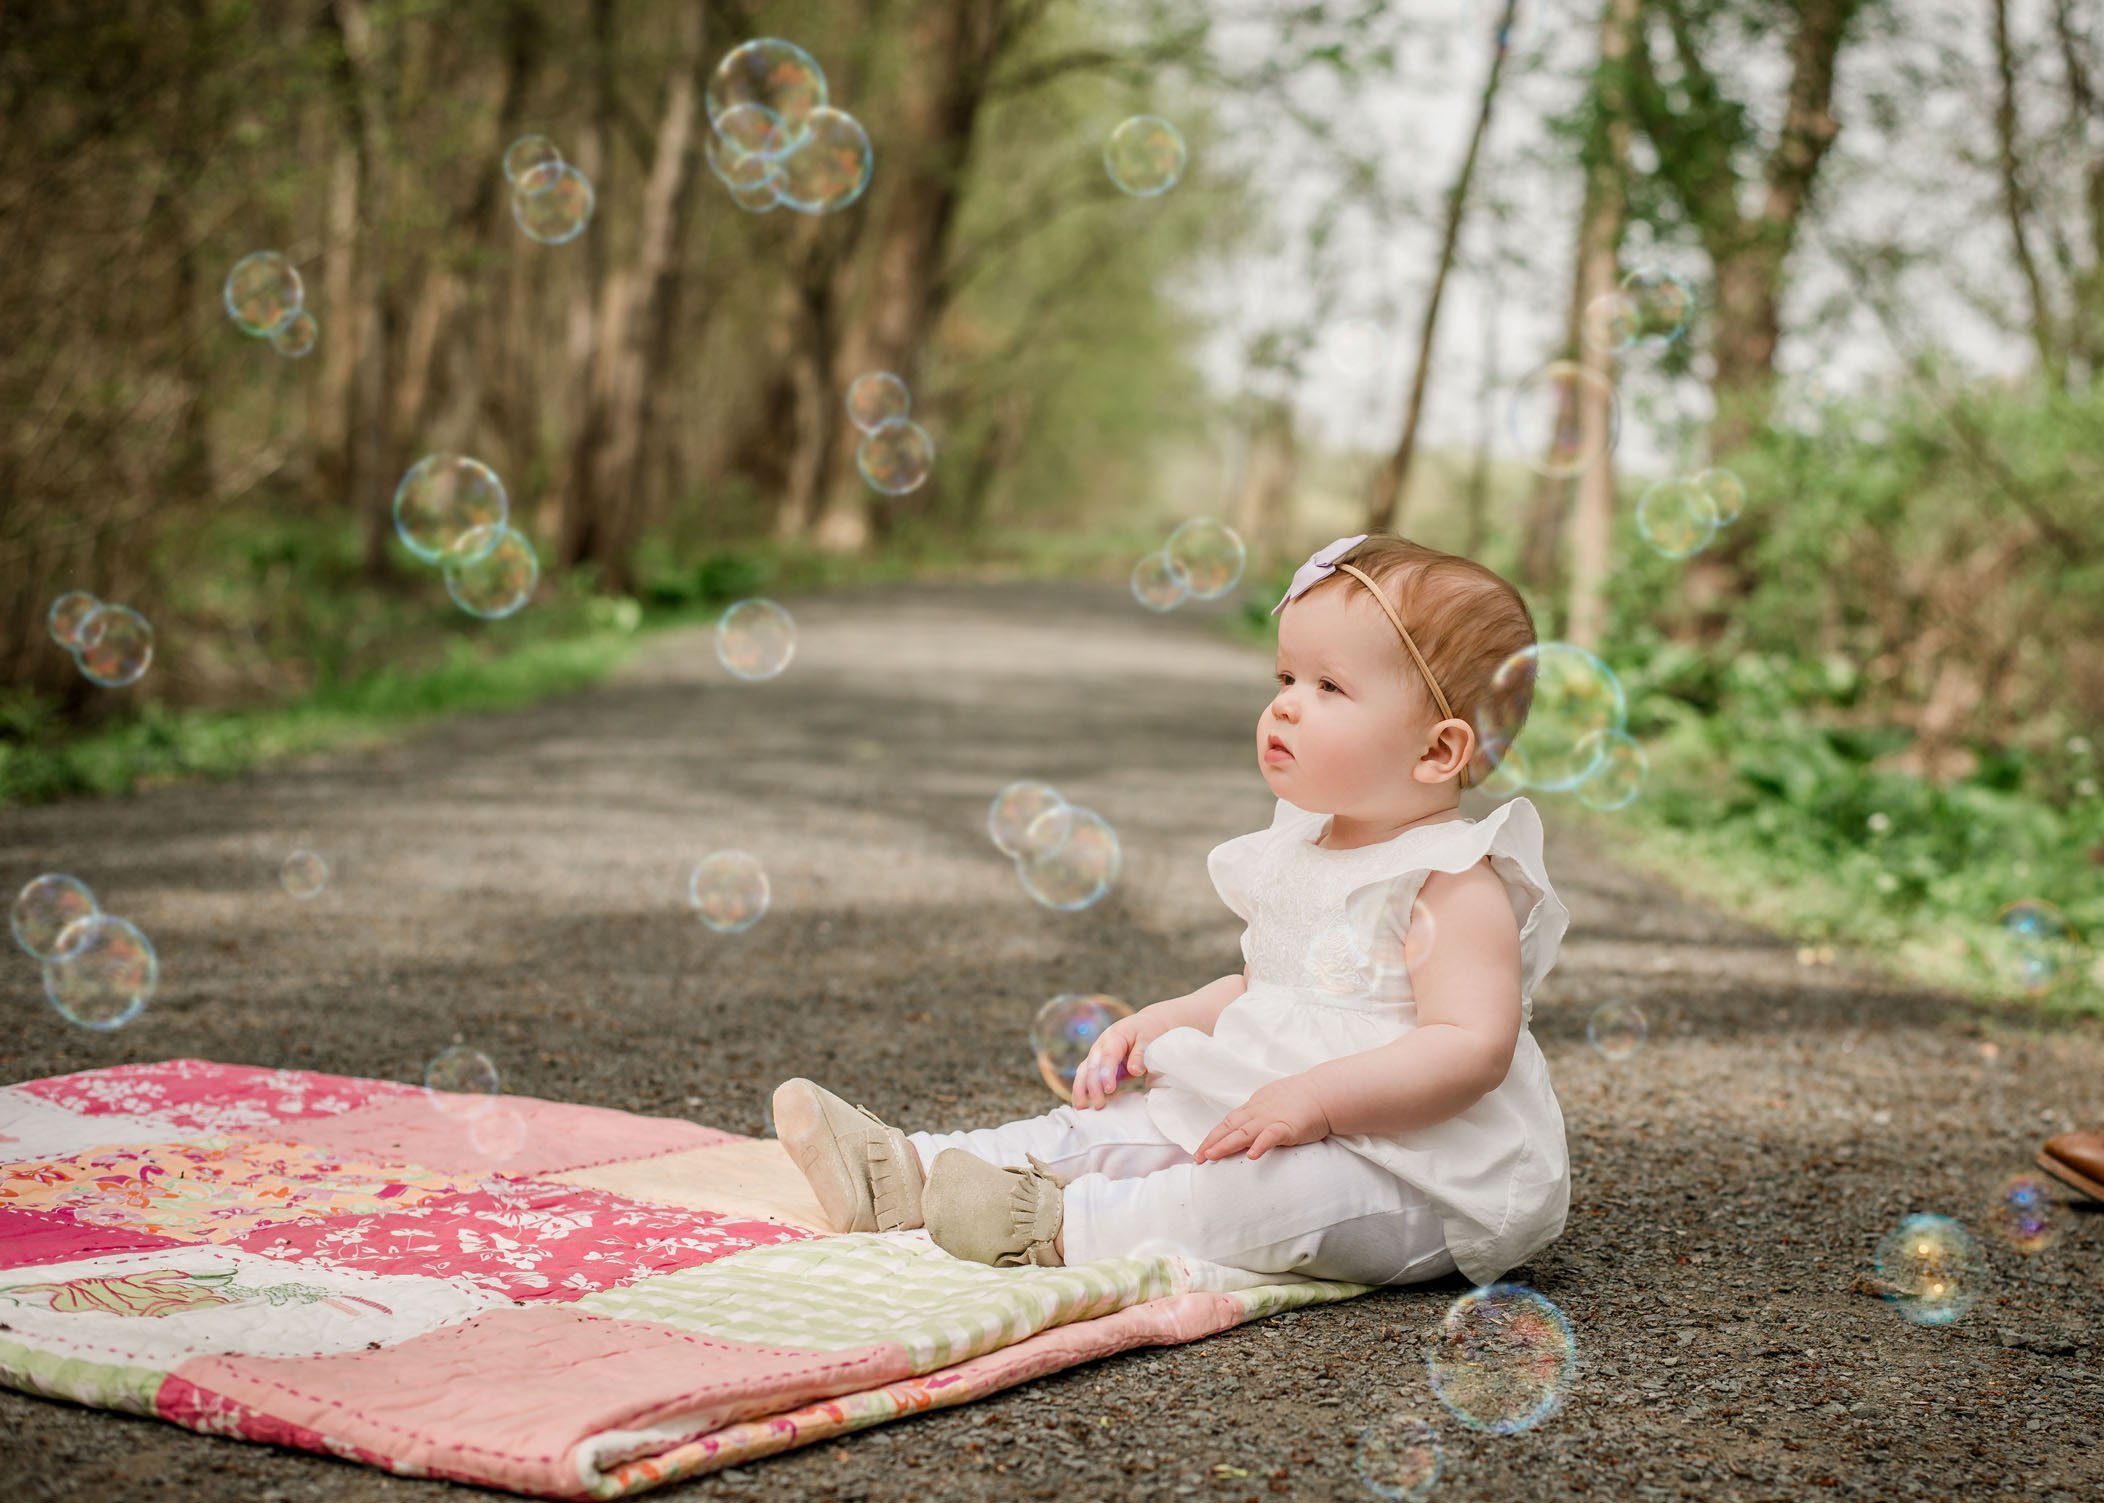 9 mo old baby girl looking at bubbles in the garden